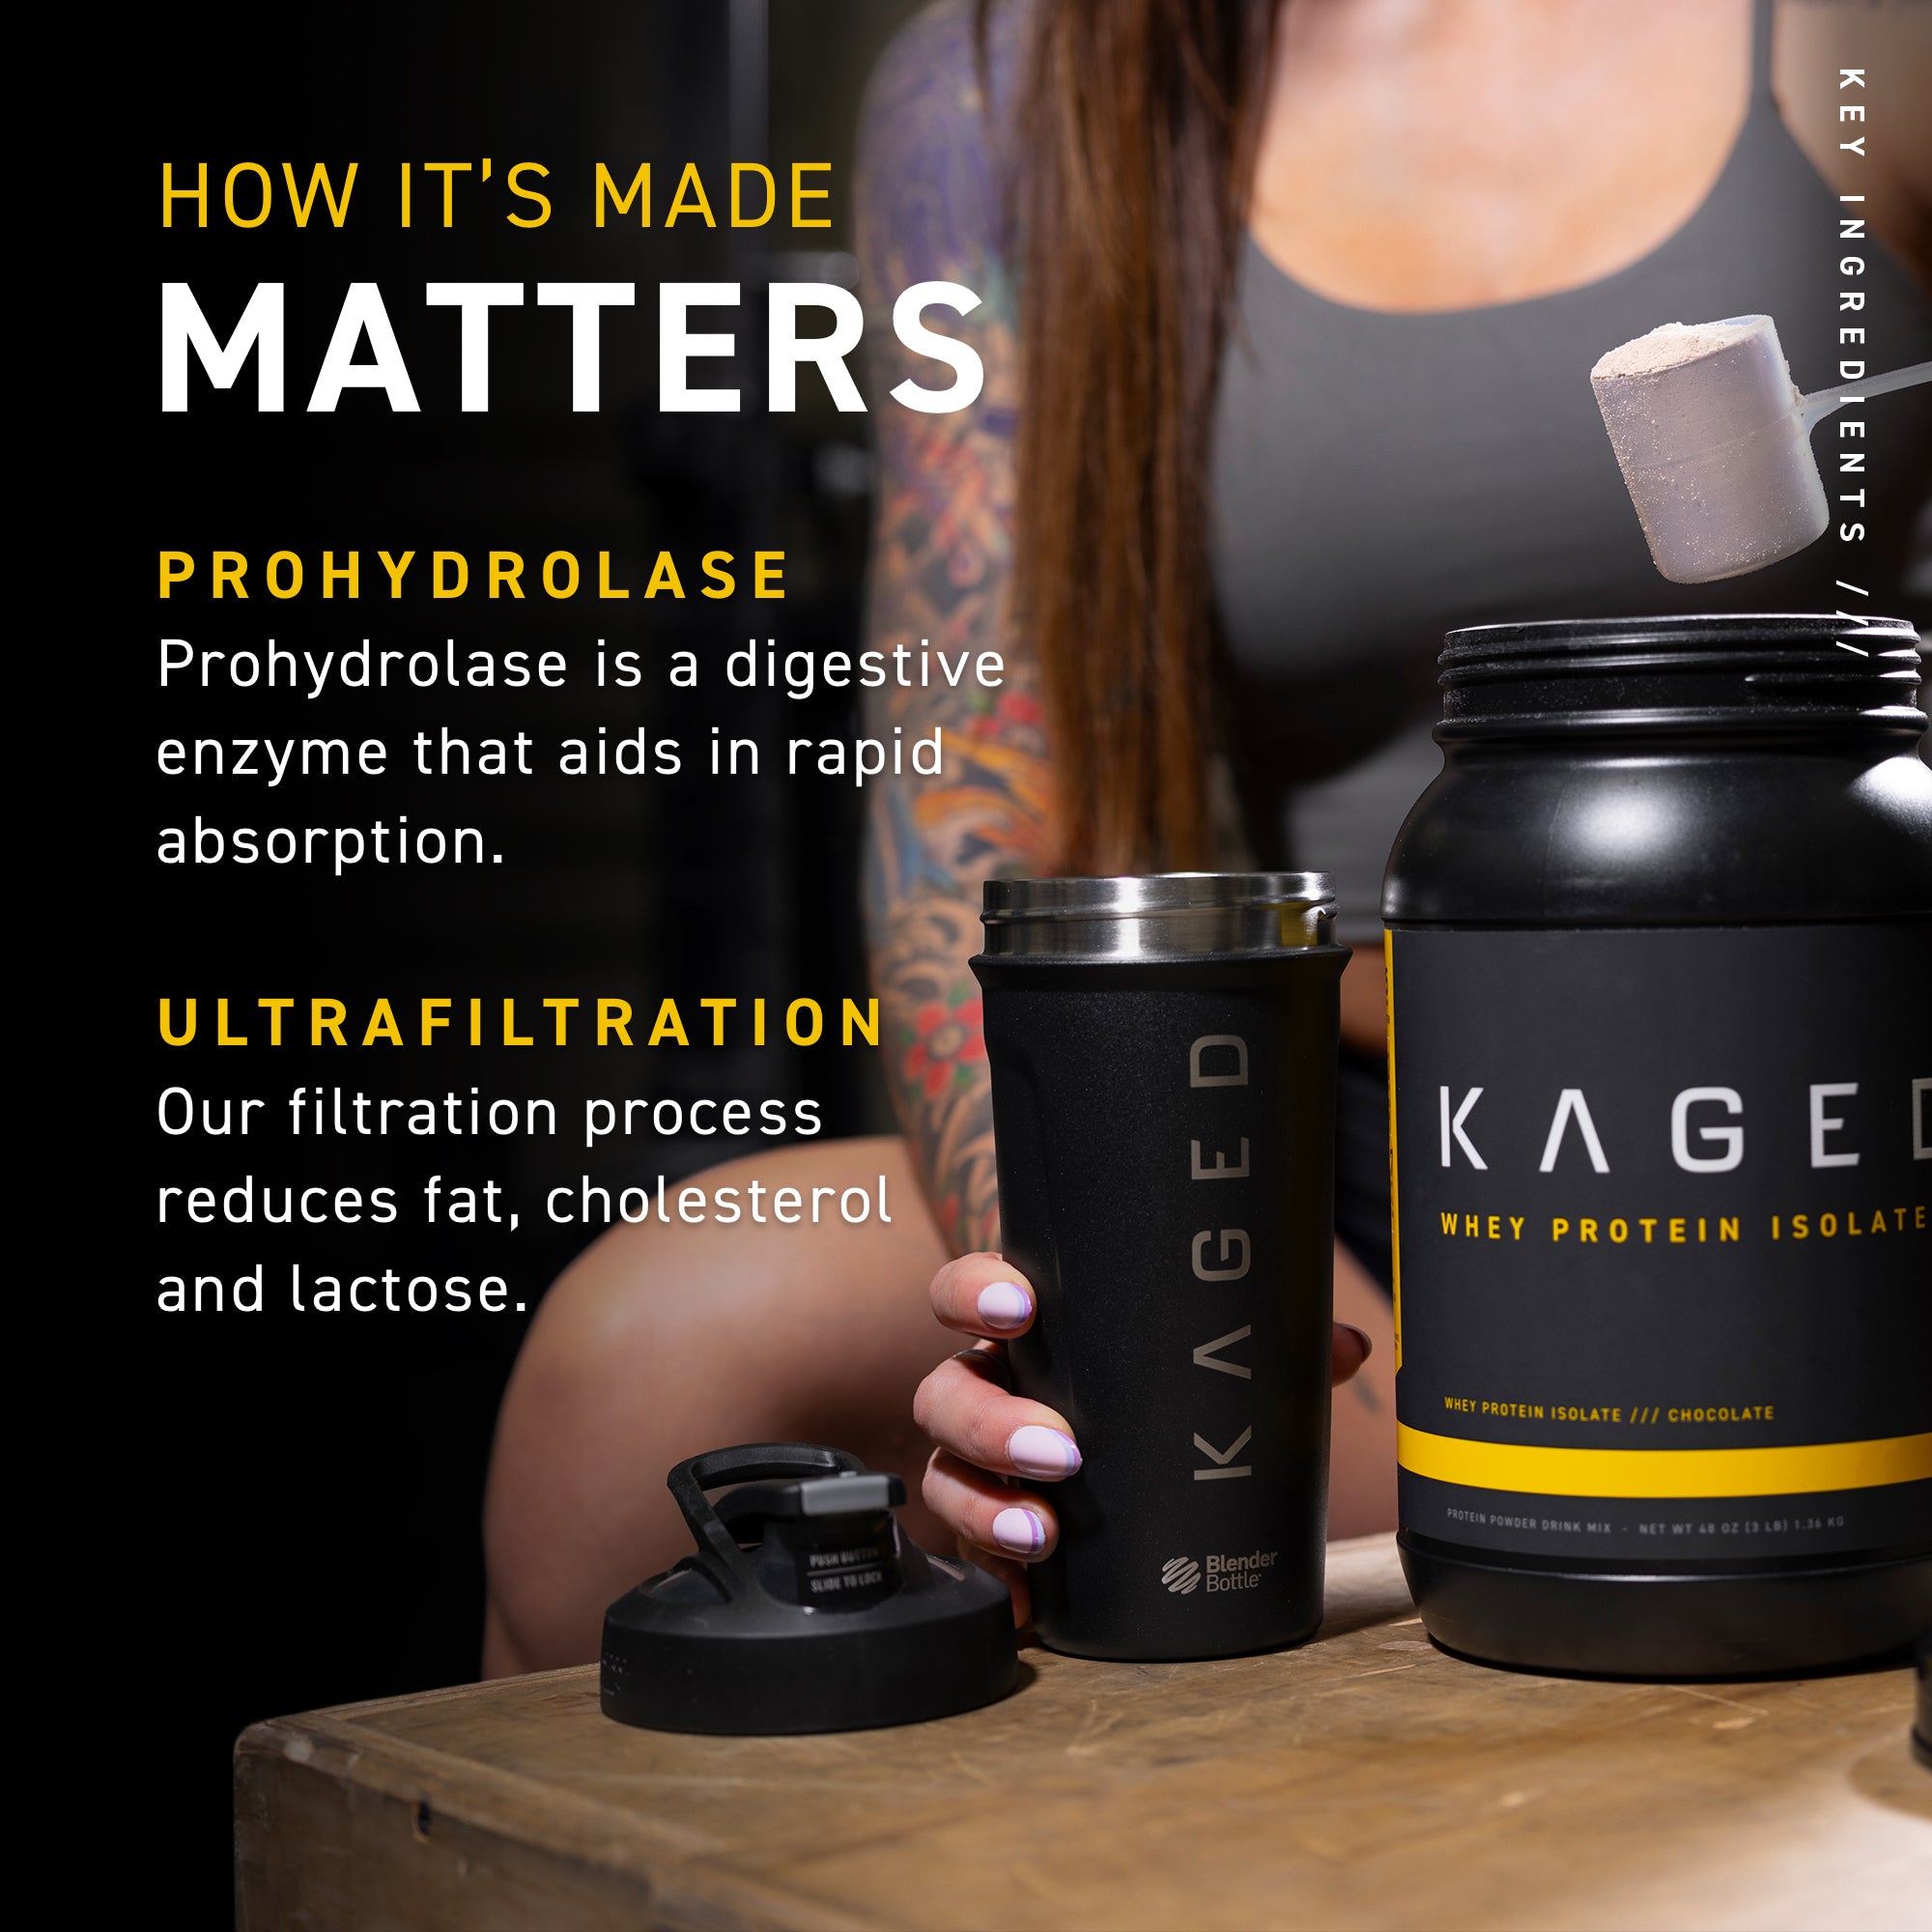 Kaged Whey Protein Isolate Prohydrolase